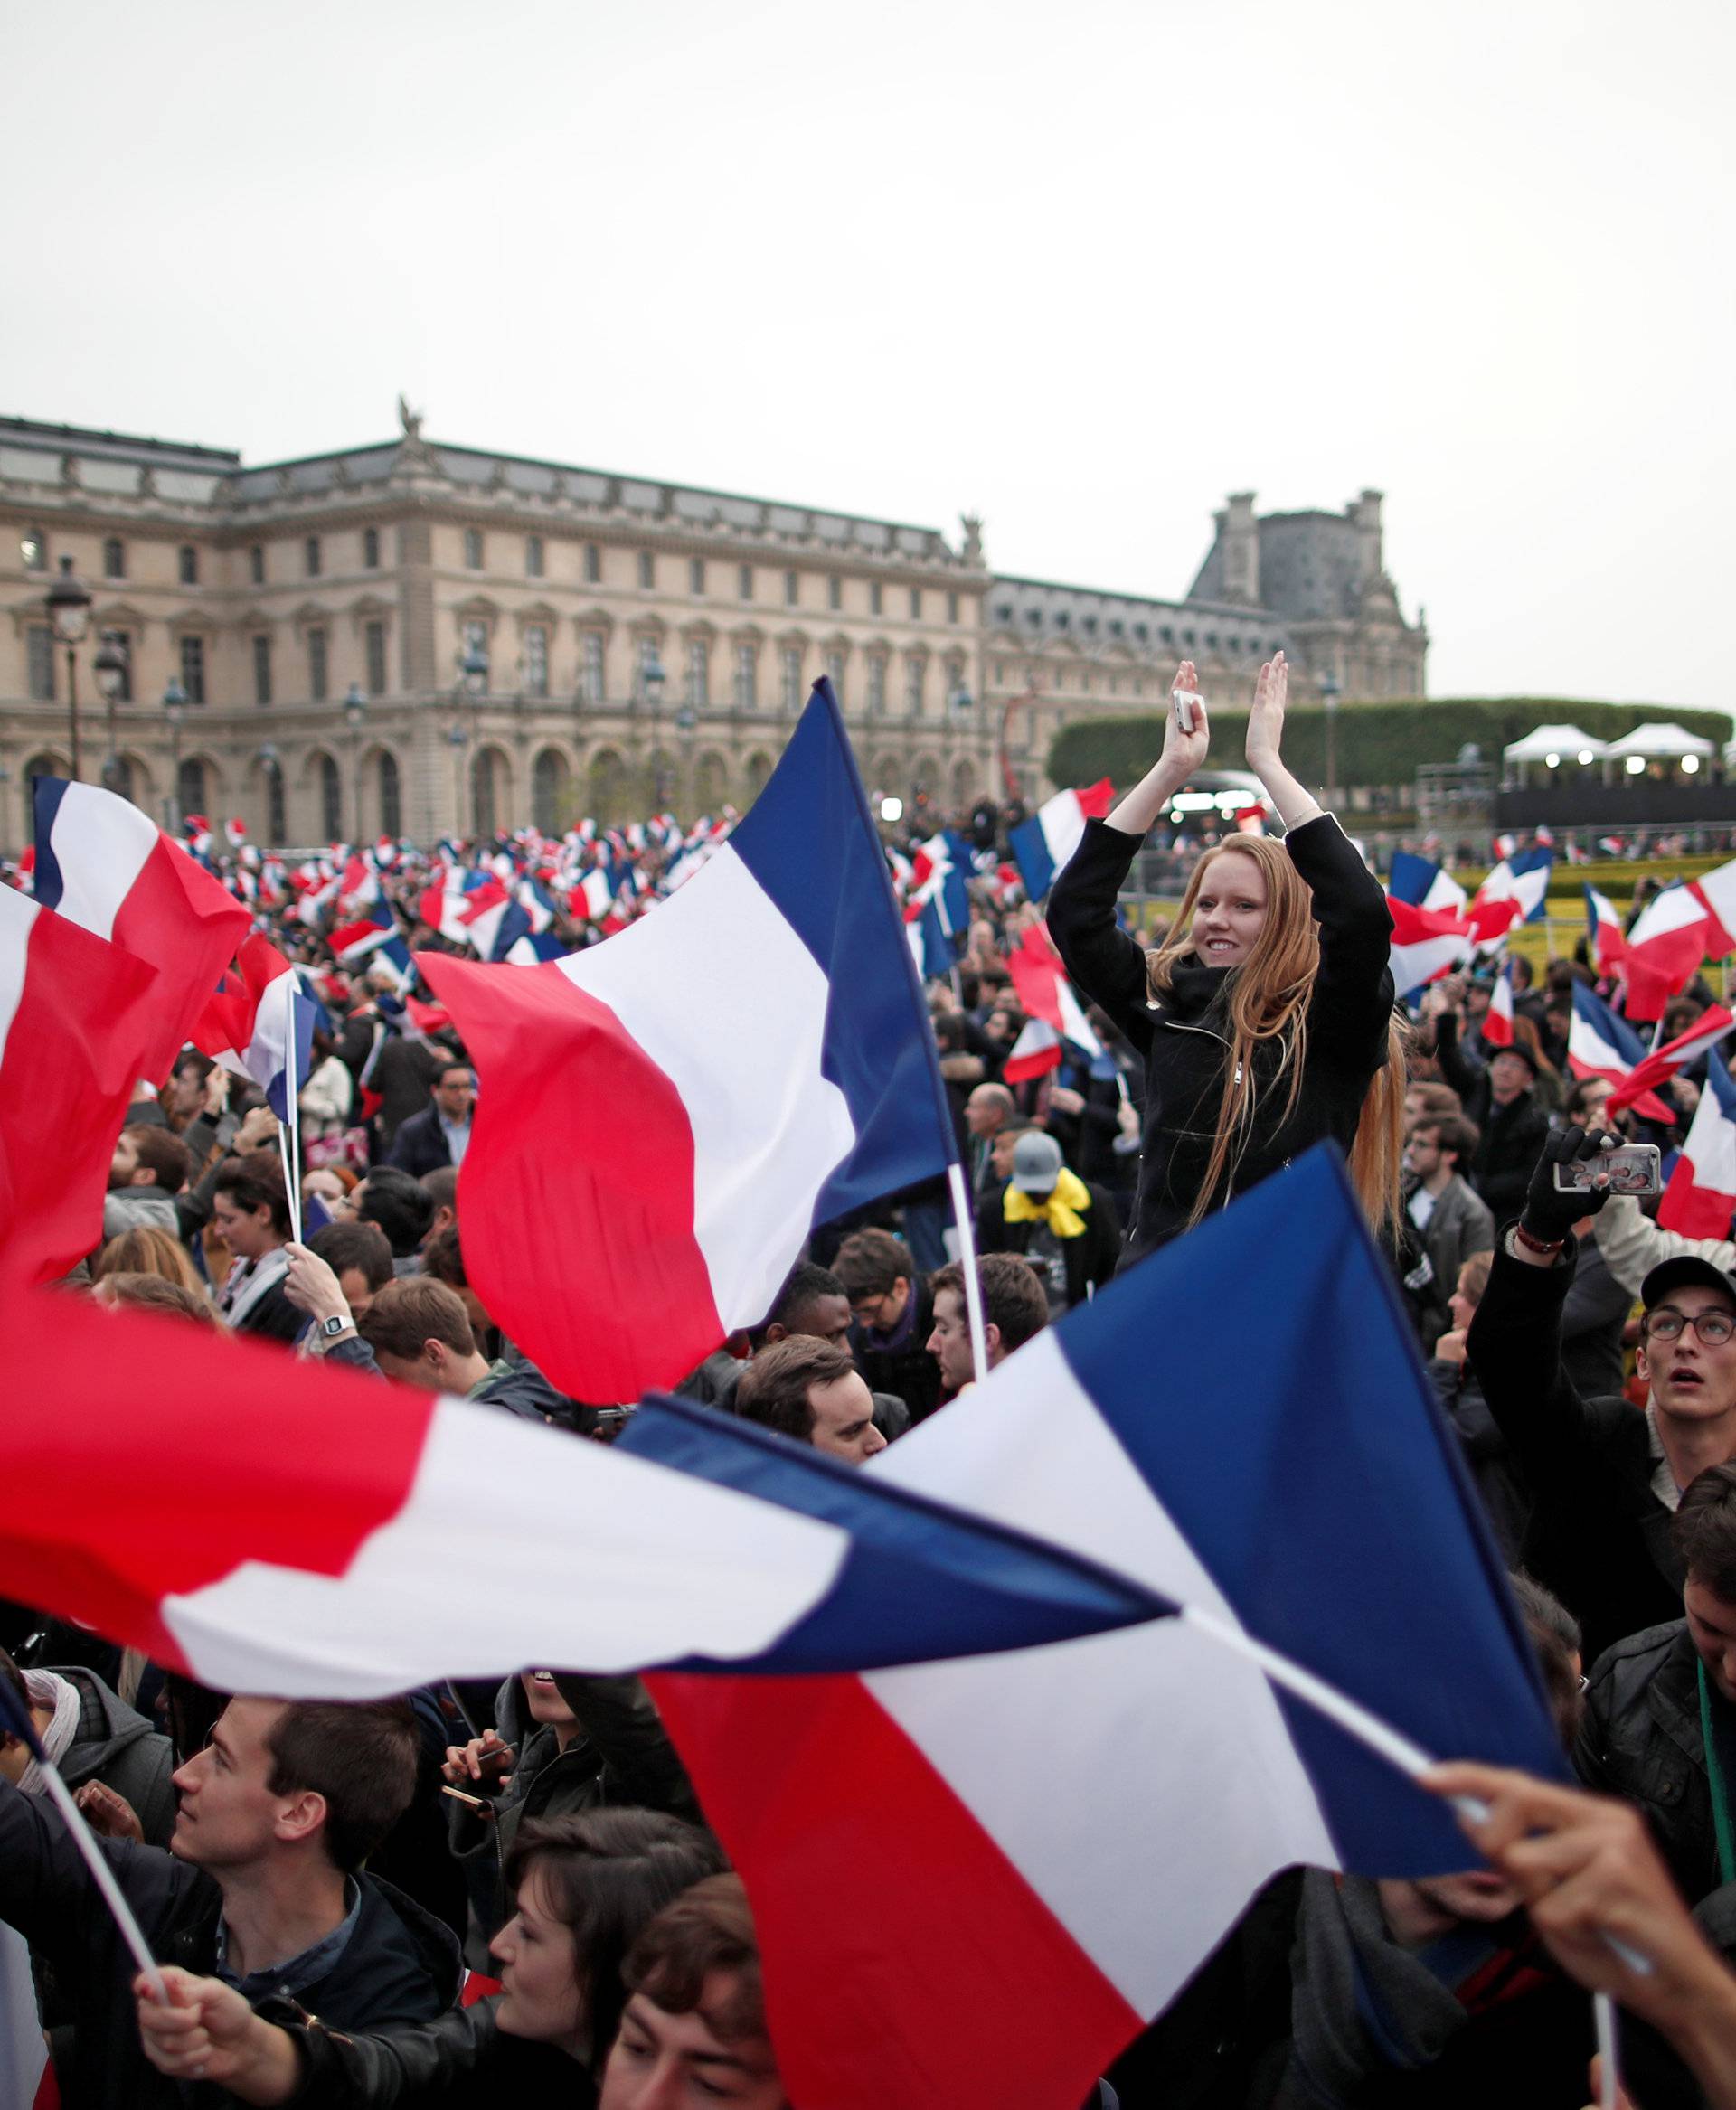 Supporters of President Elect Emmanuel Macron celebrate near the Louvre museum after results were announced in the second round vote of the 2017 French presidential elections, in Paris